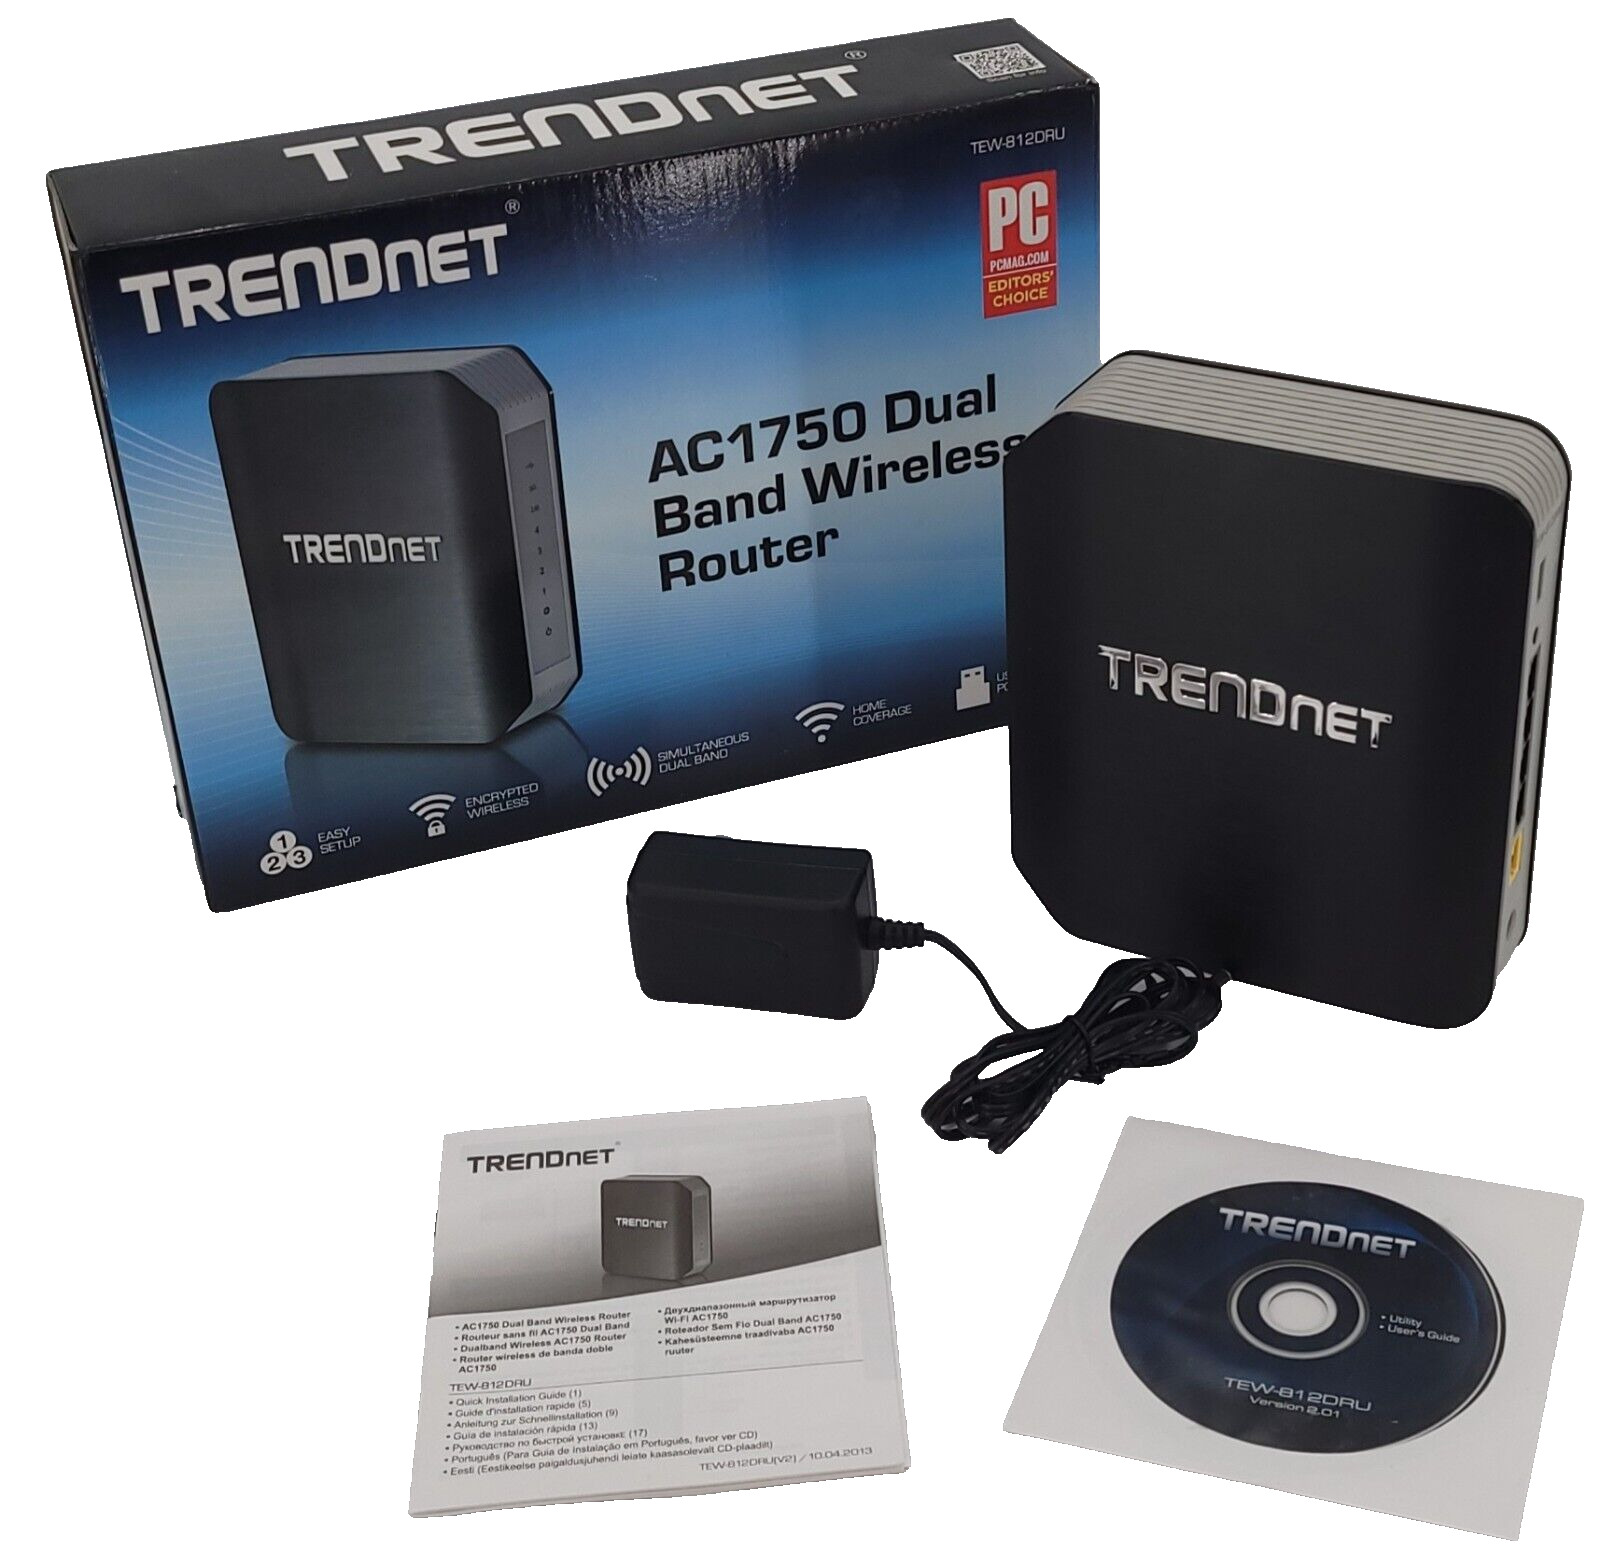 Trendnet TEW-812DRU/A AC1750 Dual Band Wireless Router